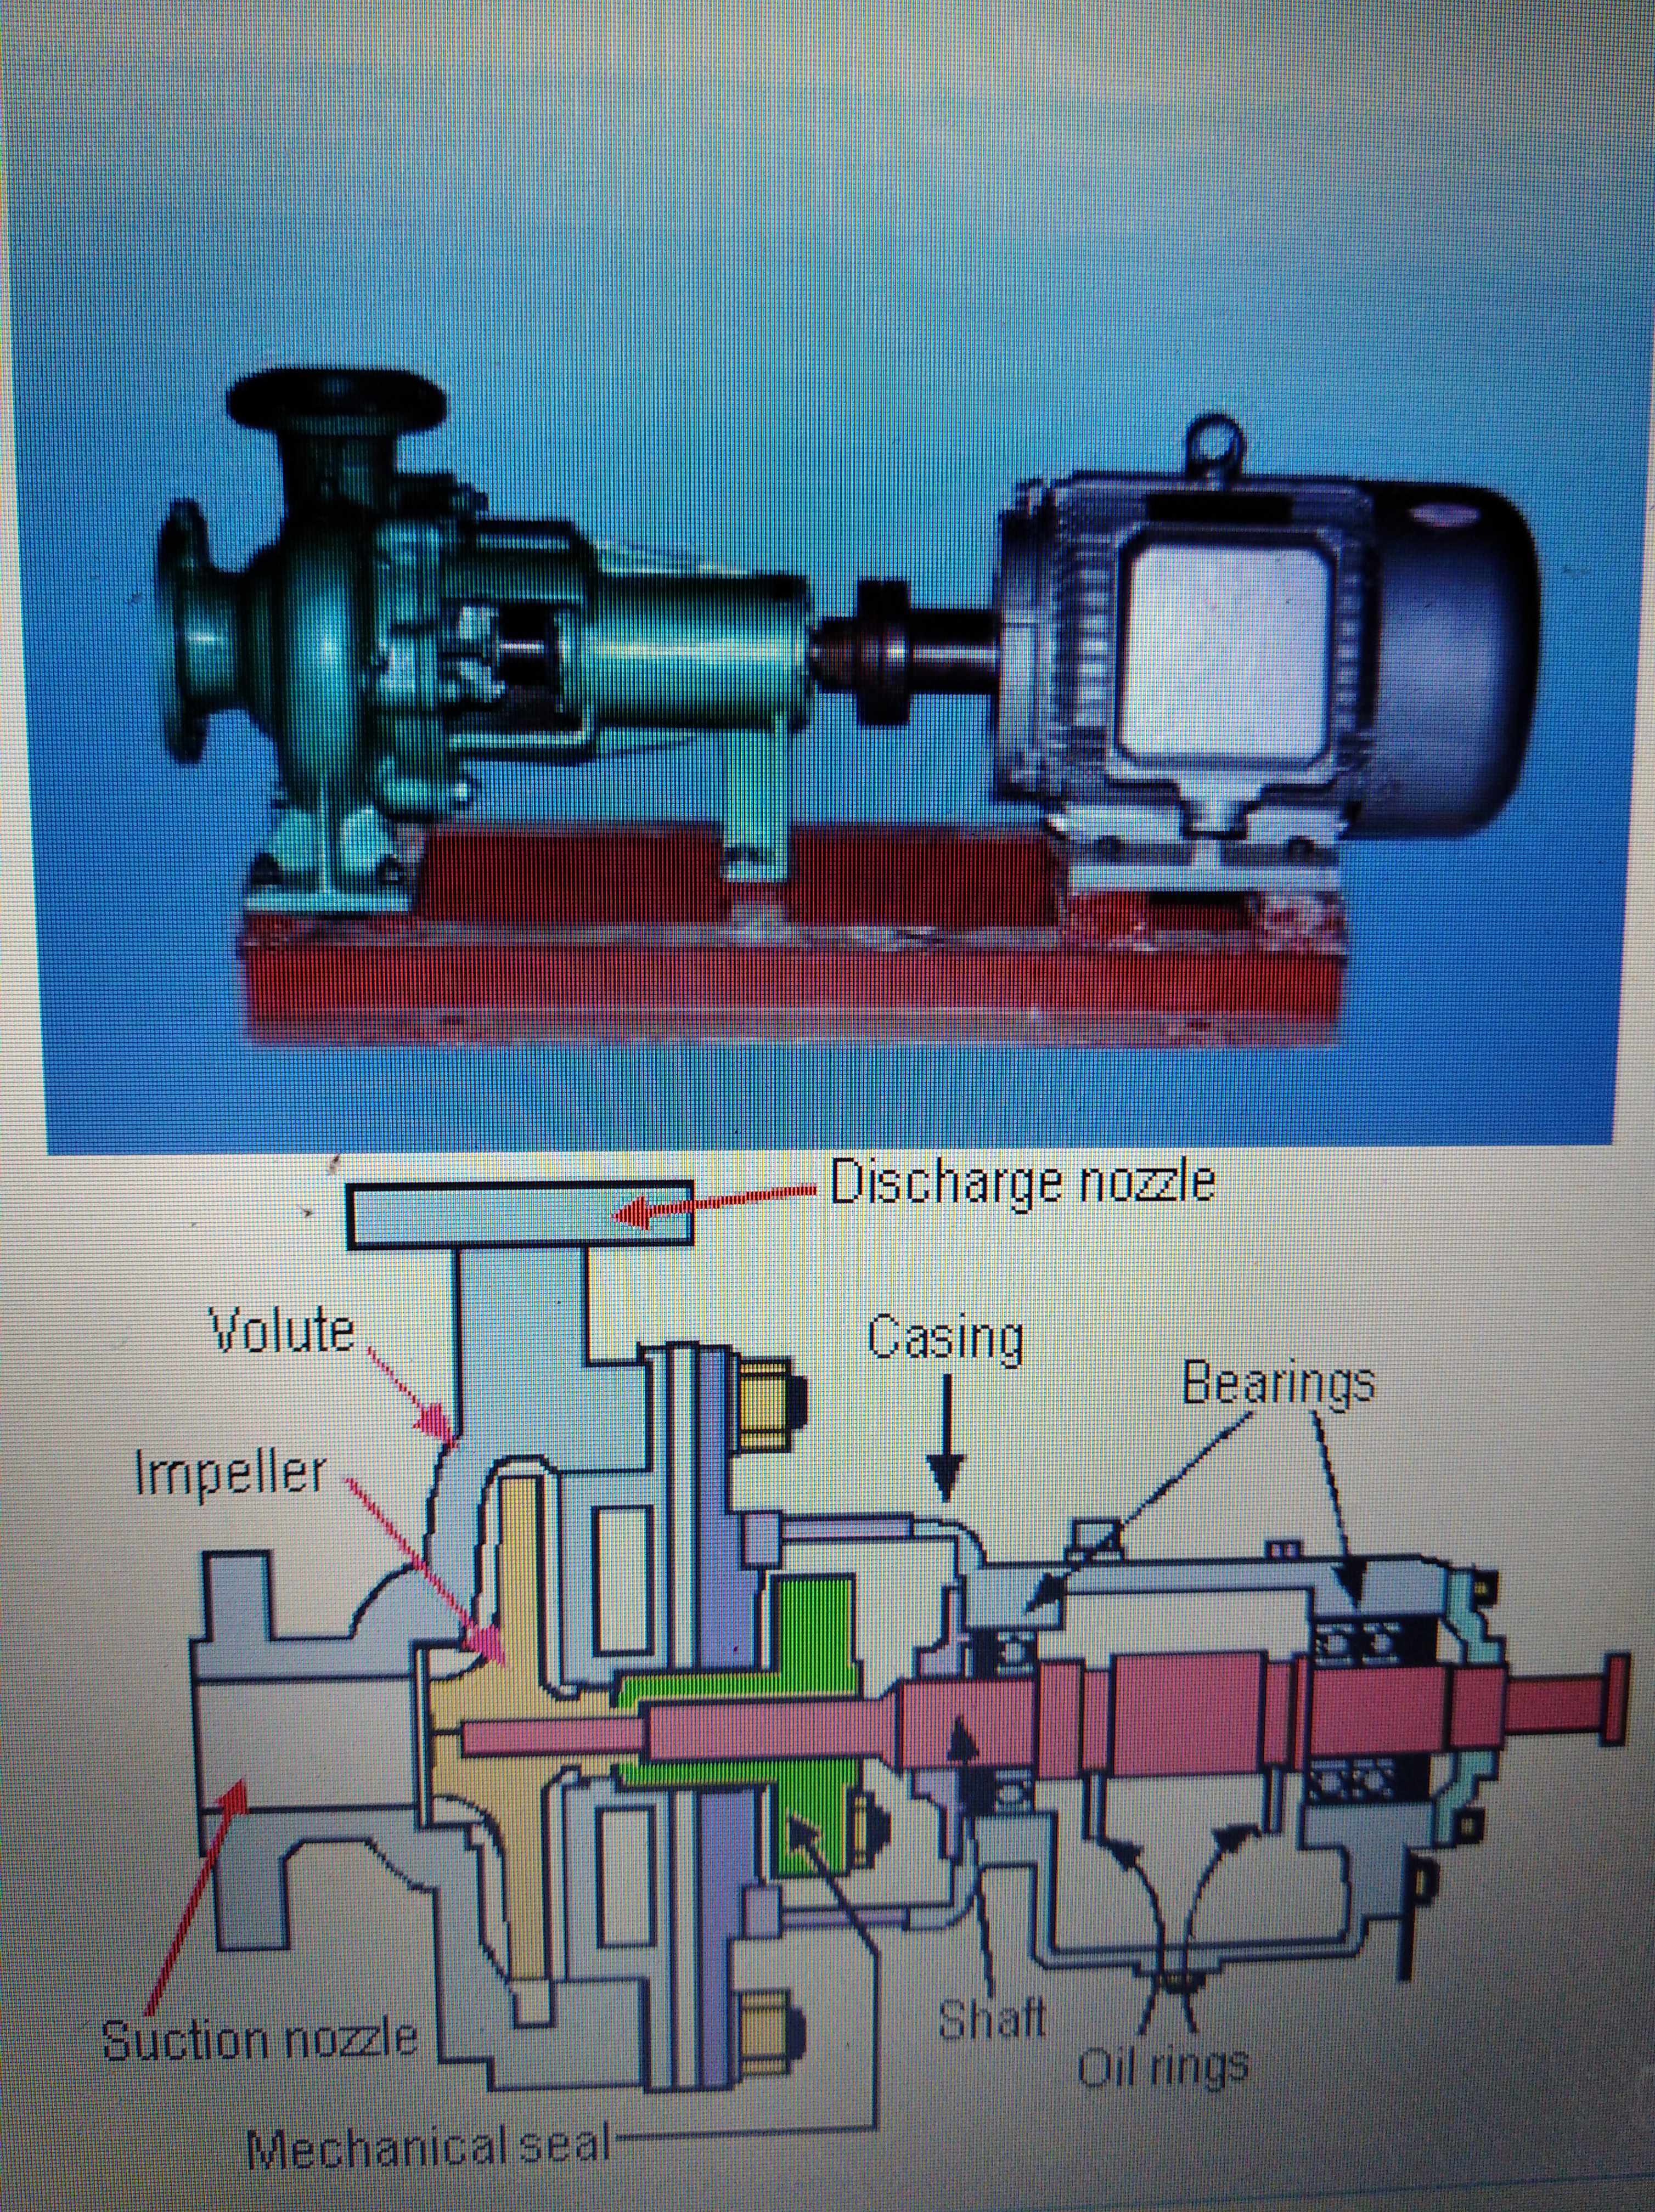 How to overhaul and operate marine centrifugal pump